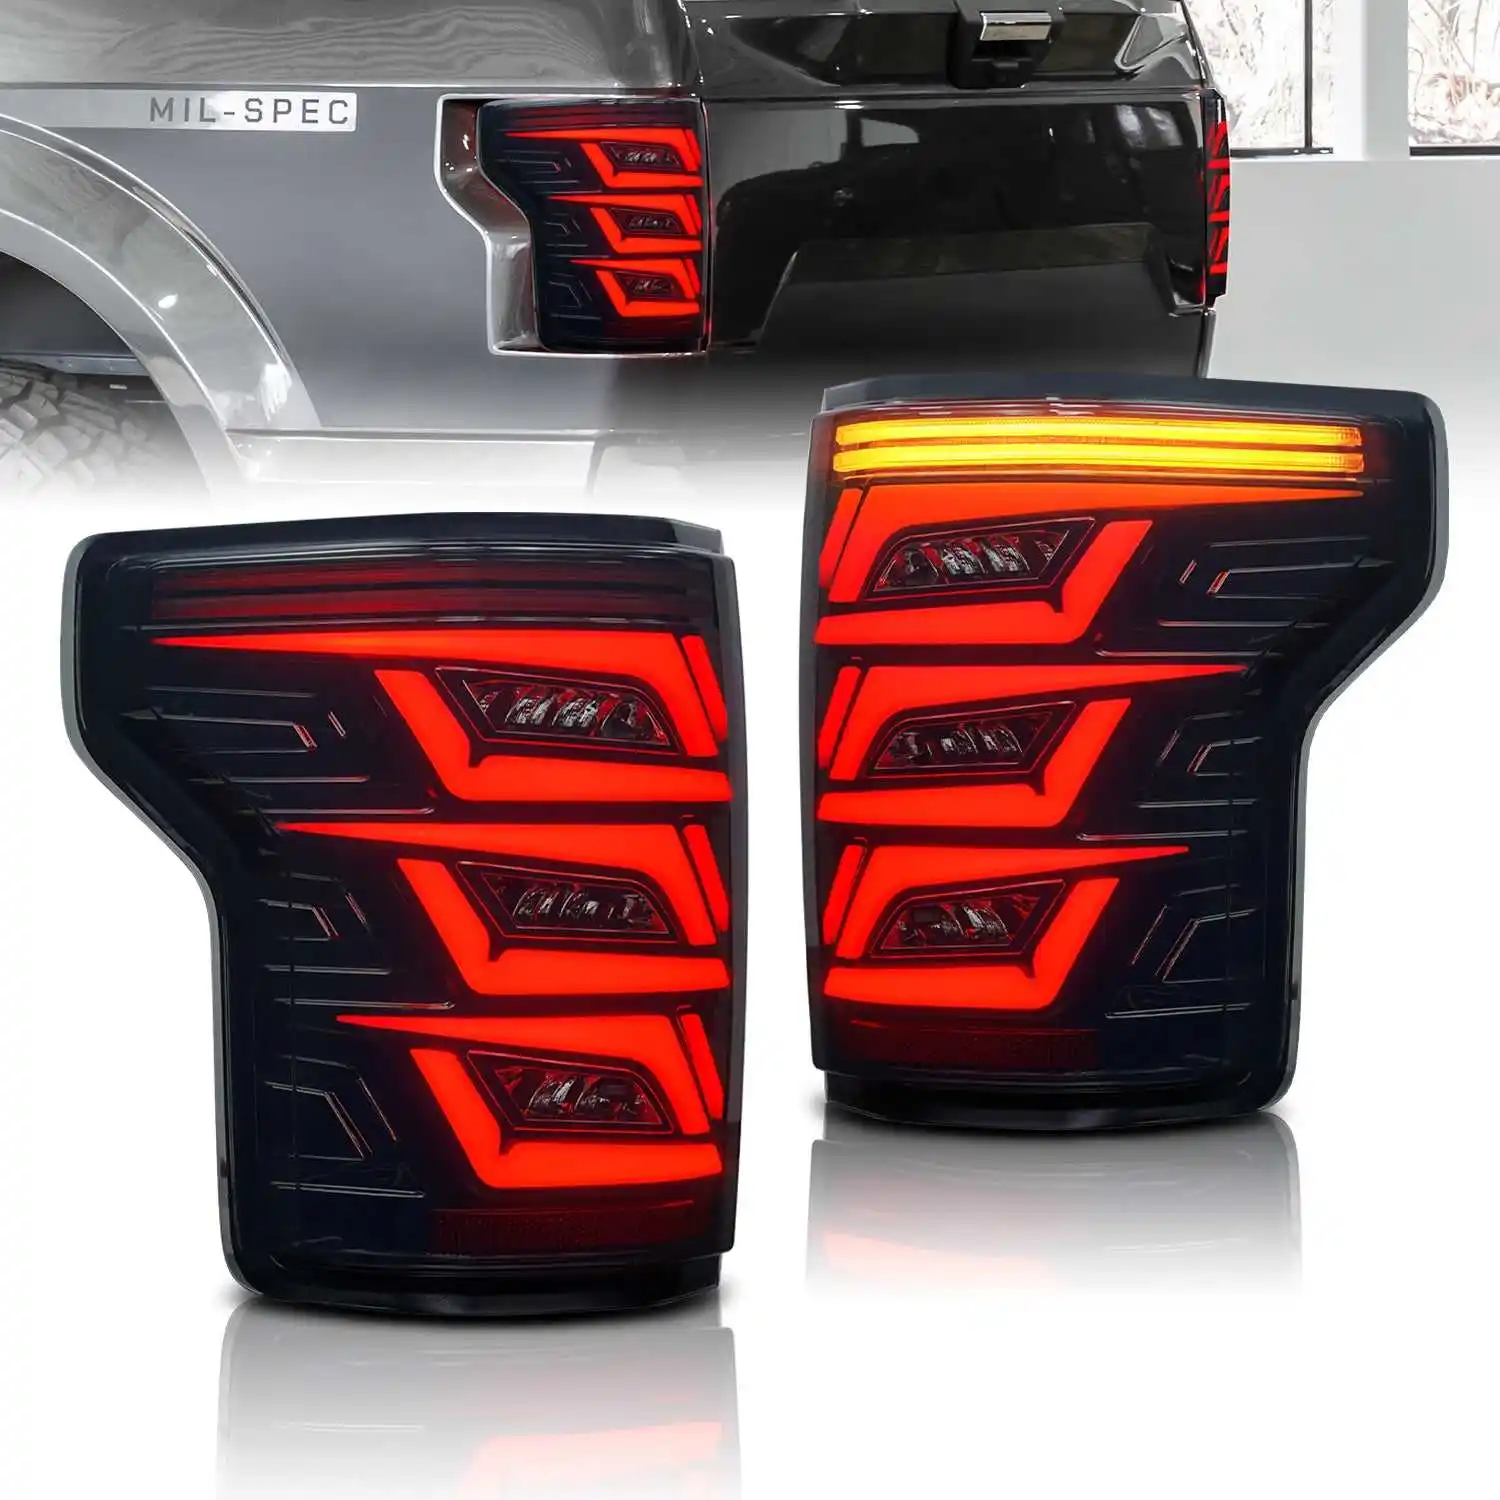 Car Auto Accessories Parts Plug And Play Dark Smoke LED Rear Light Replacement ABS Tail Lamp For Ford F150